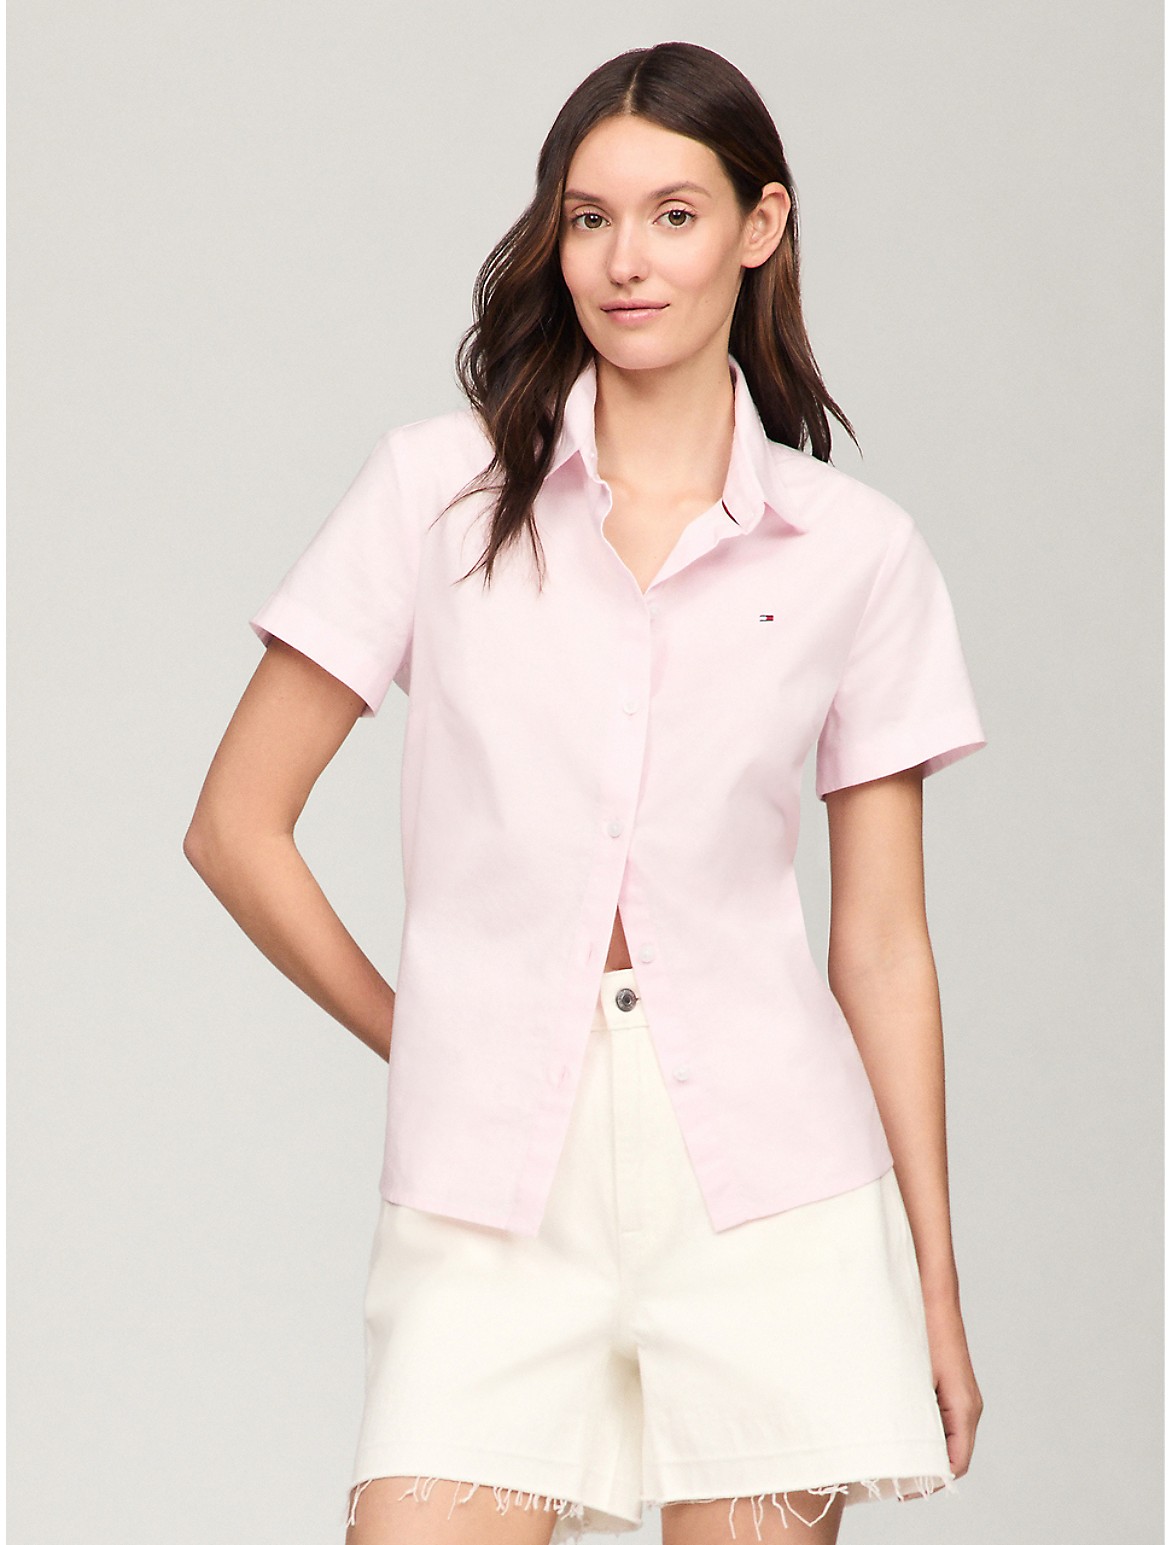 Tommy Hilfiger Women's Relaxed Fit Solid Oxford Shirt - Pink - S